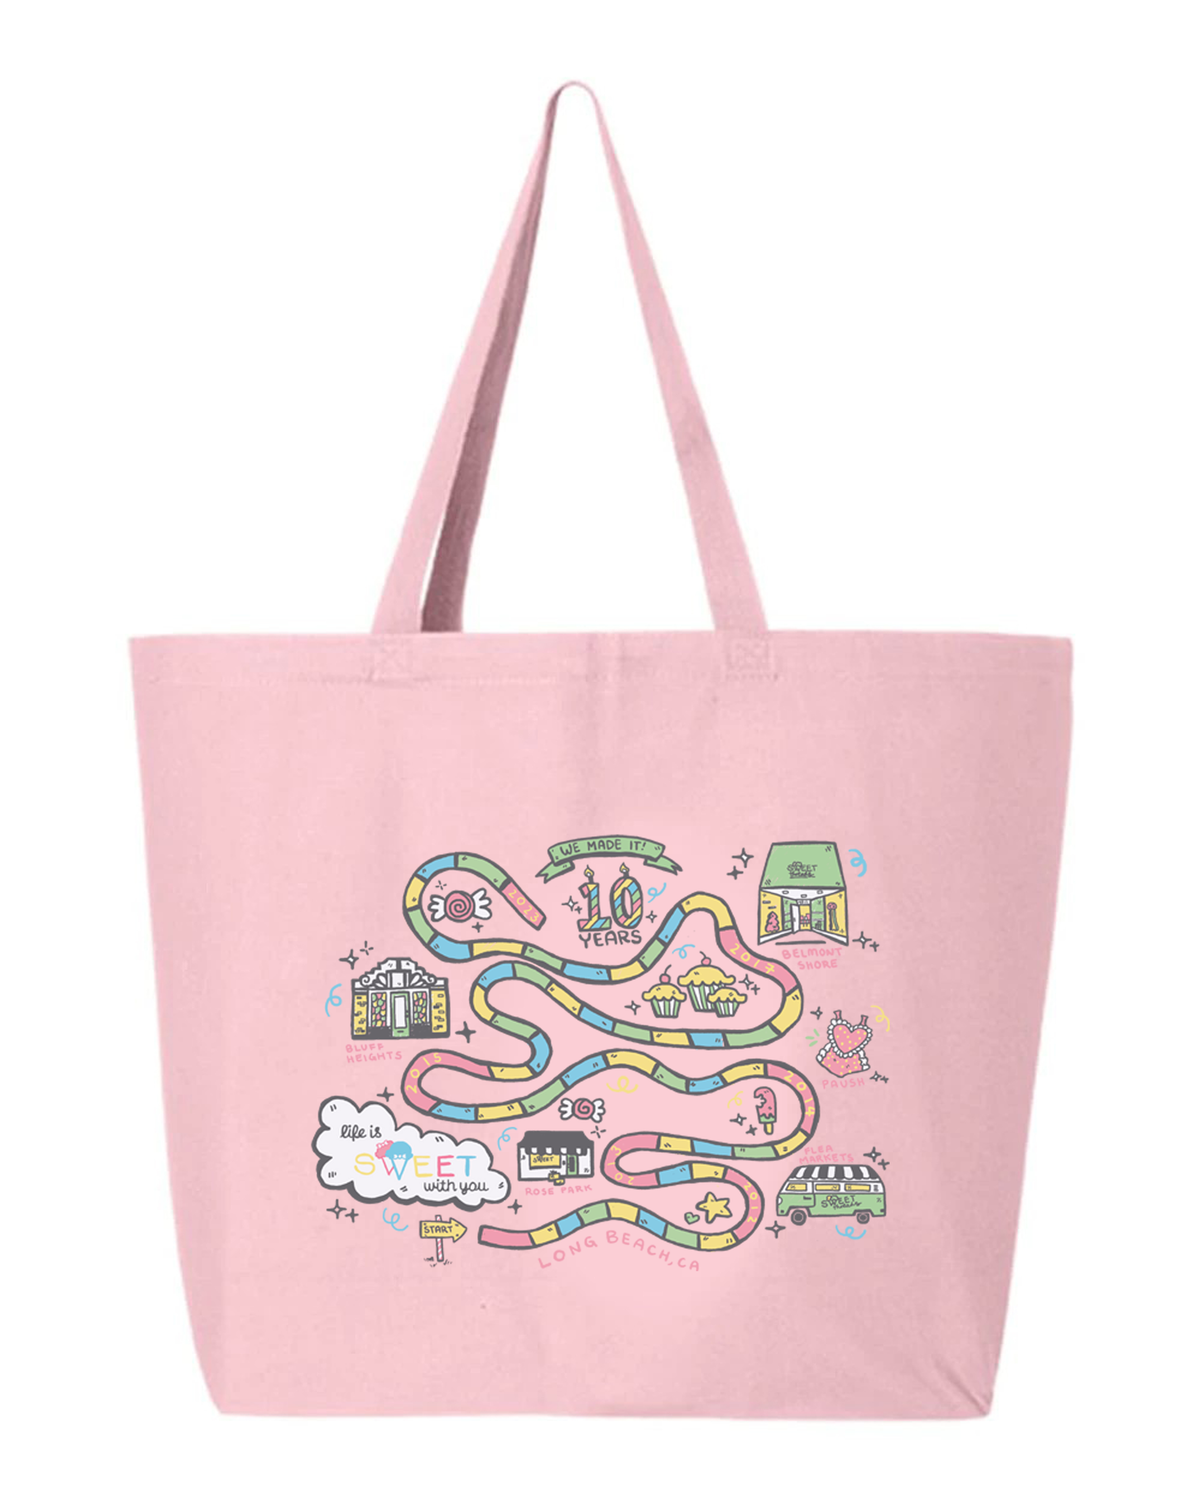 Limited Edition Sweet Threads 10 Year Anniversary Tote